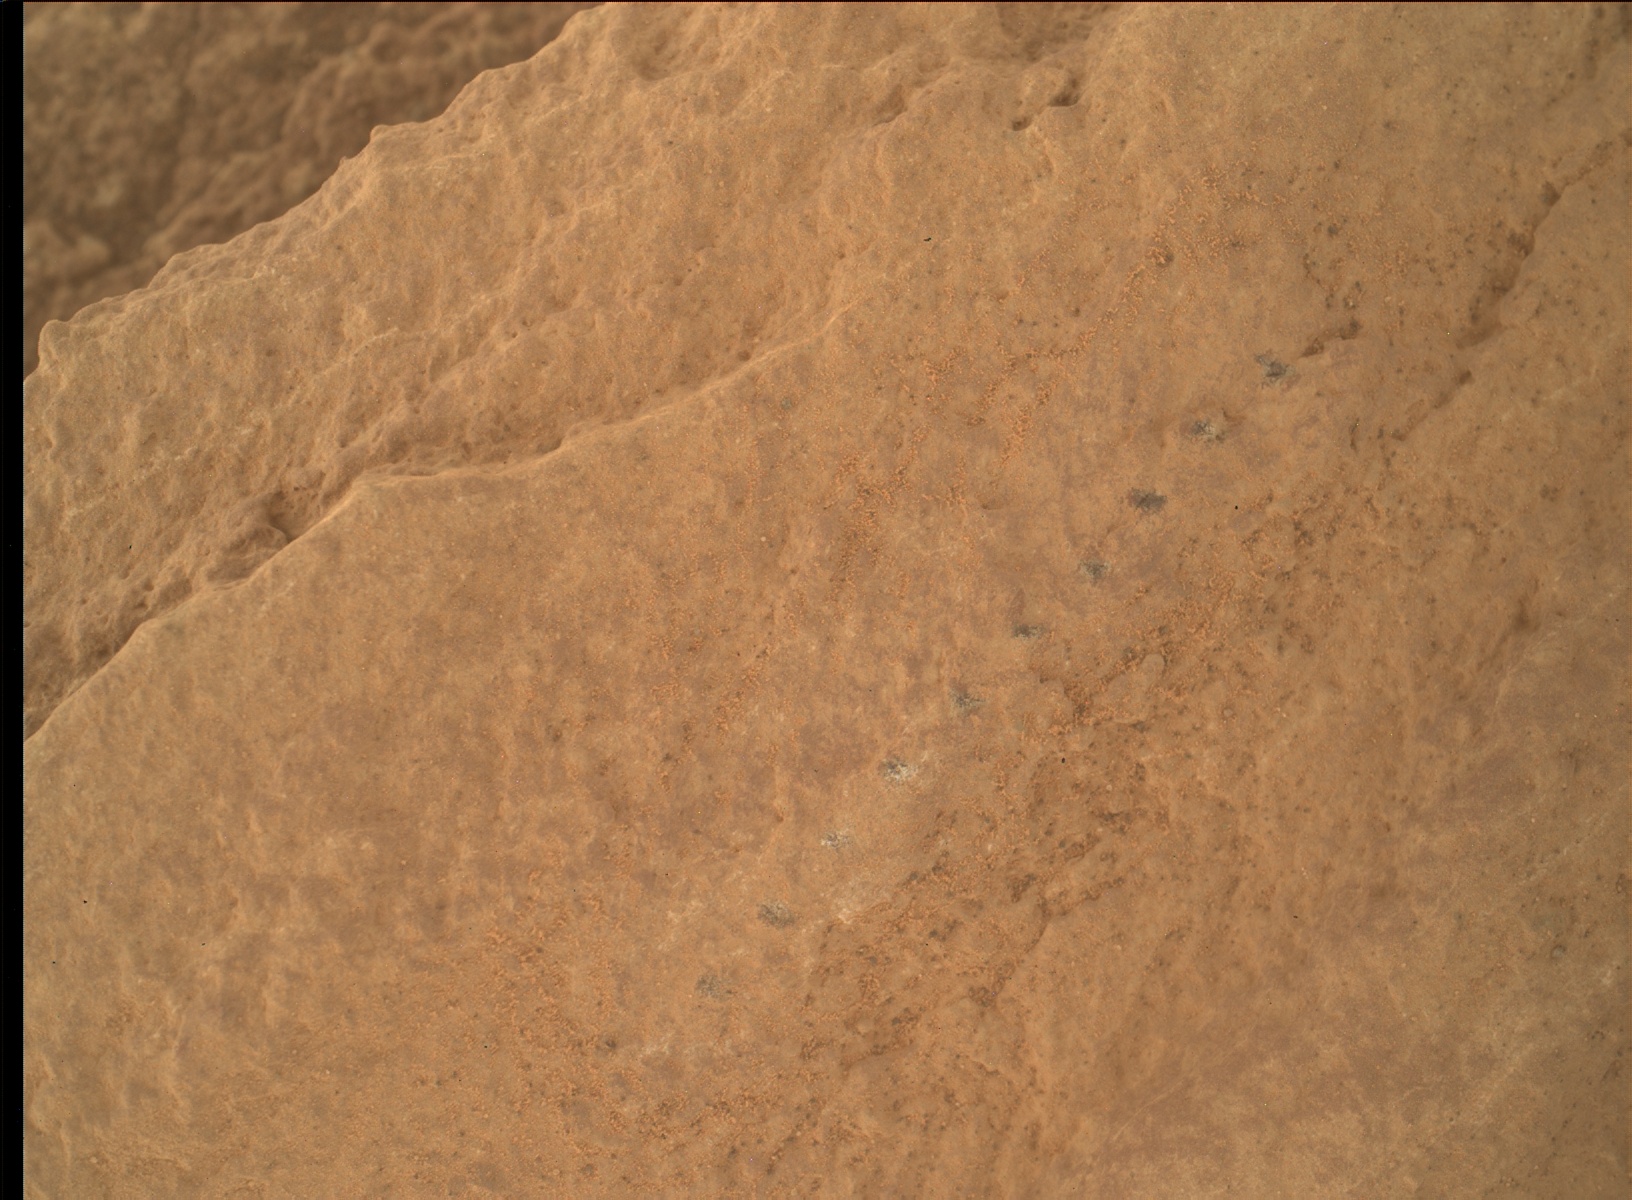 Nasa's Mars rover Curiosity acquired this image using its Mars Hand Lens Imager (MAHLI) on Sol 2579